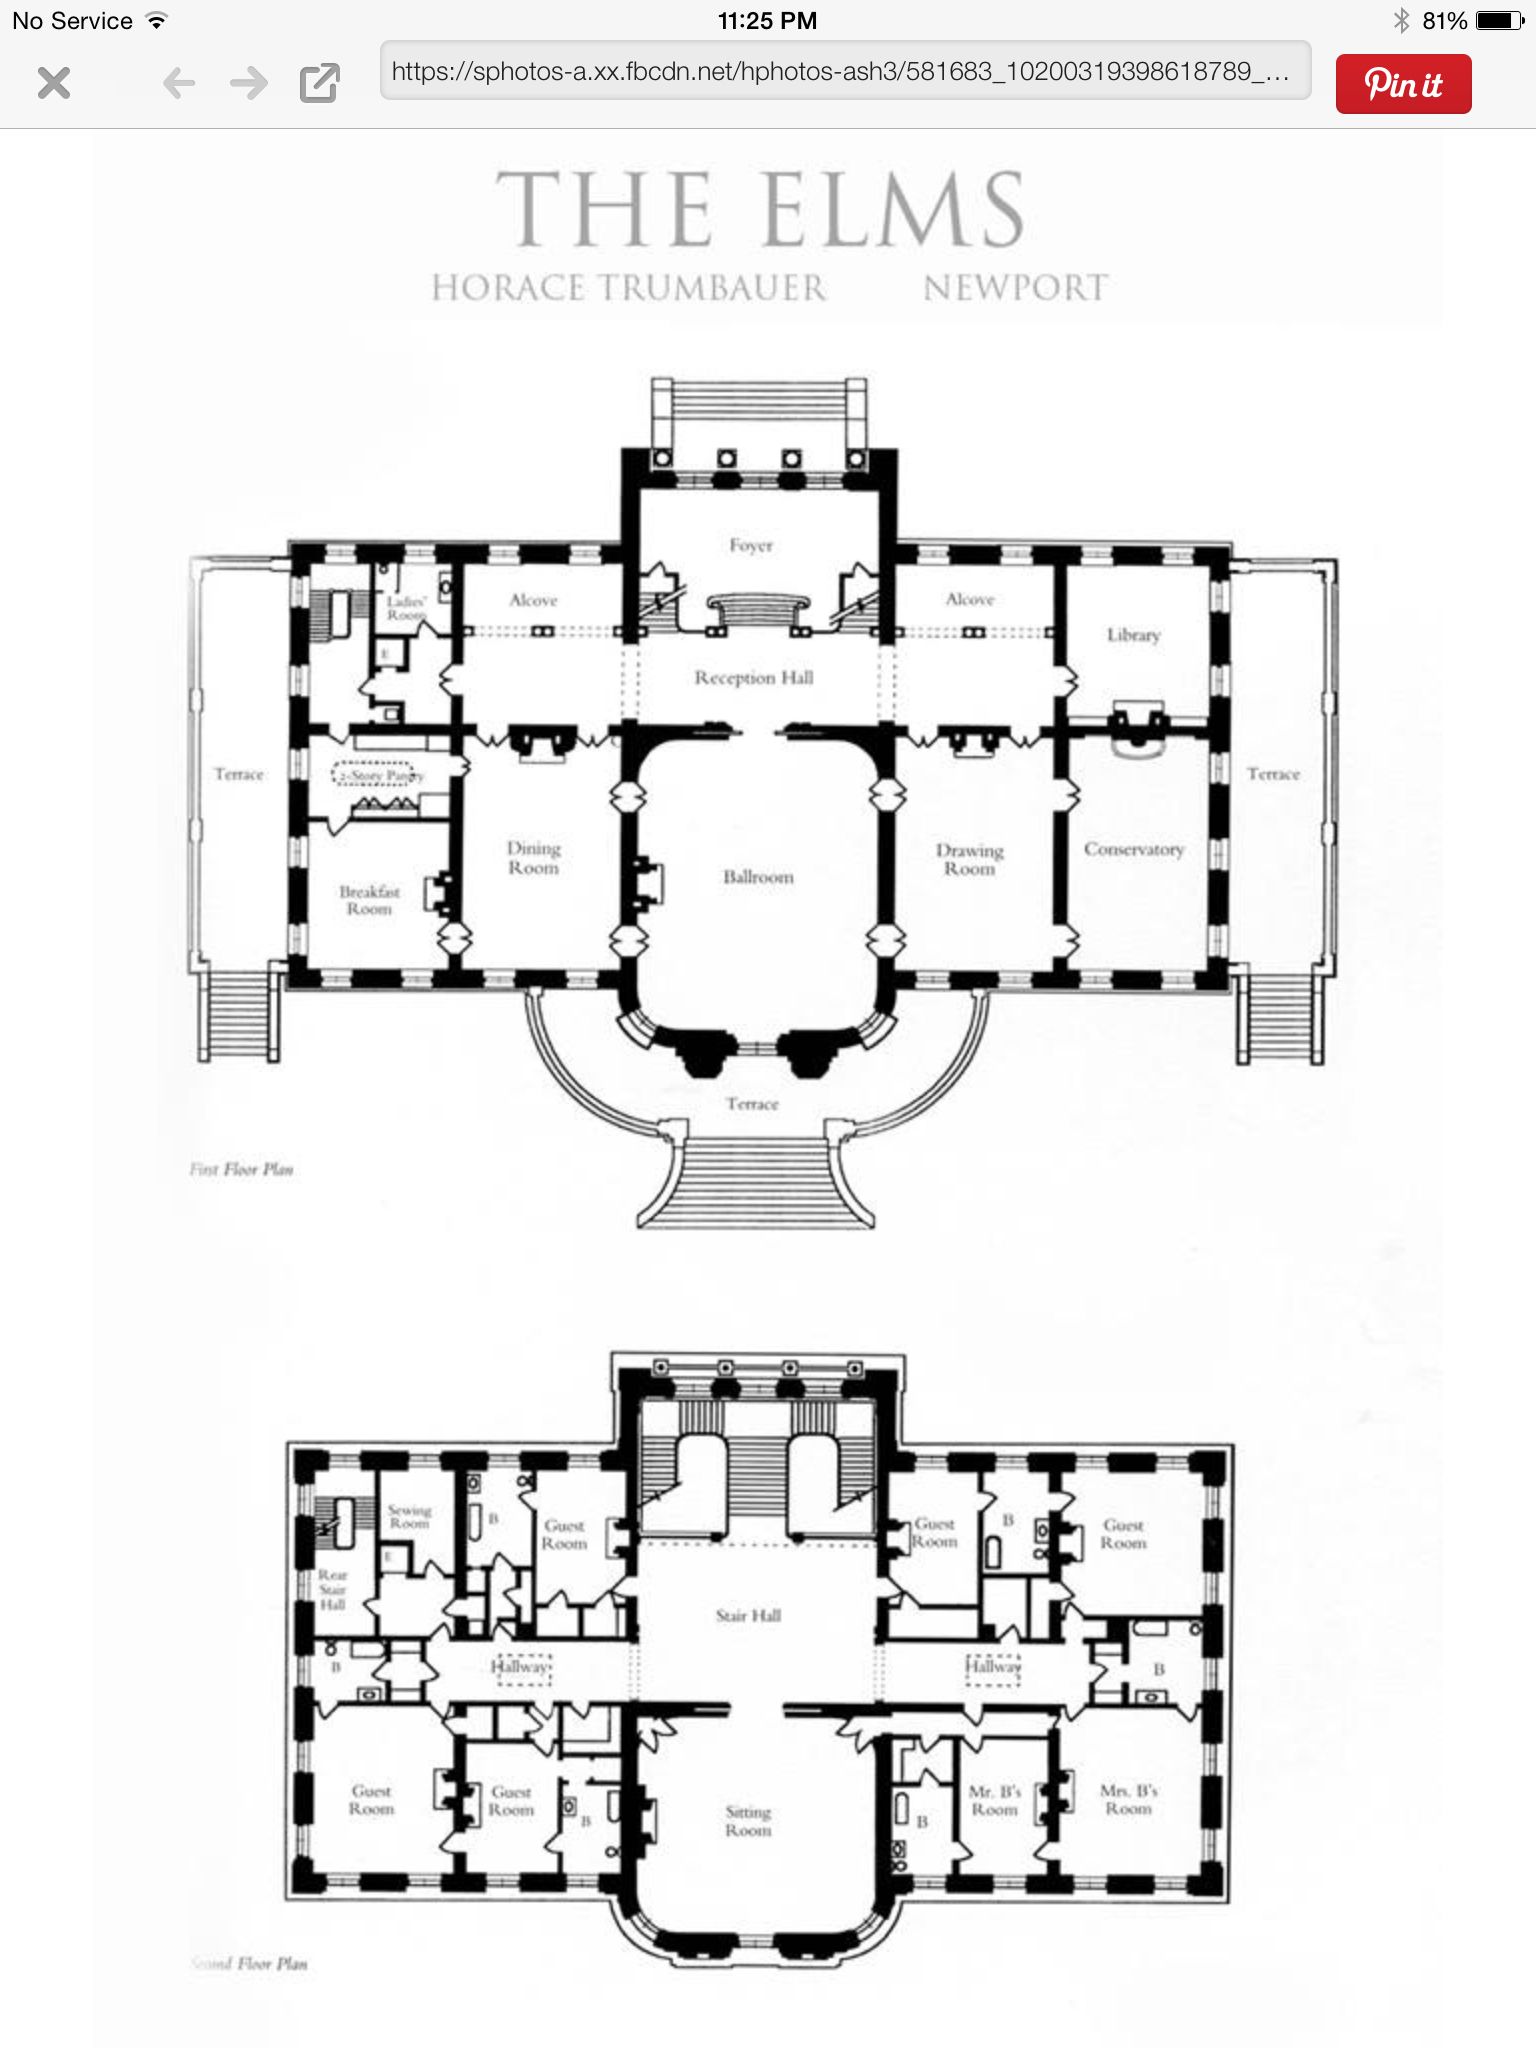 The Elms 1st and 2nd floors Architectural floor plans